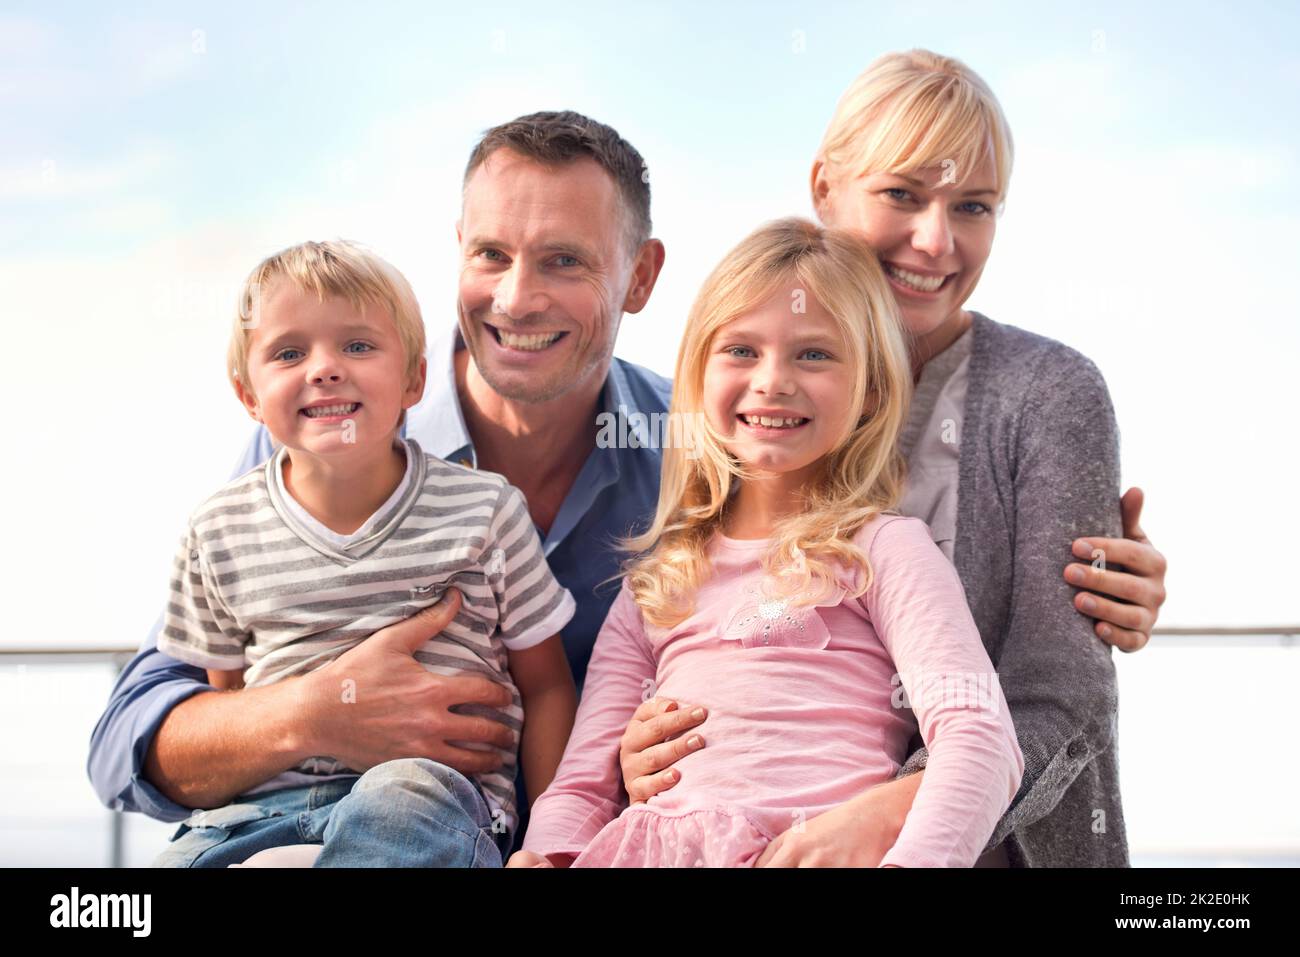 Family first. A portrait of two happy parents spending time with their young children. Stock Photo